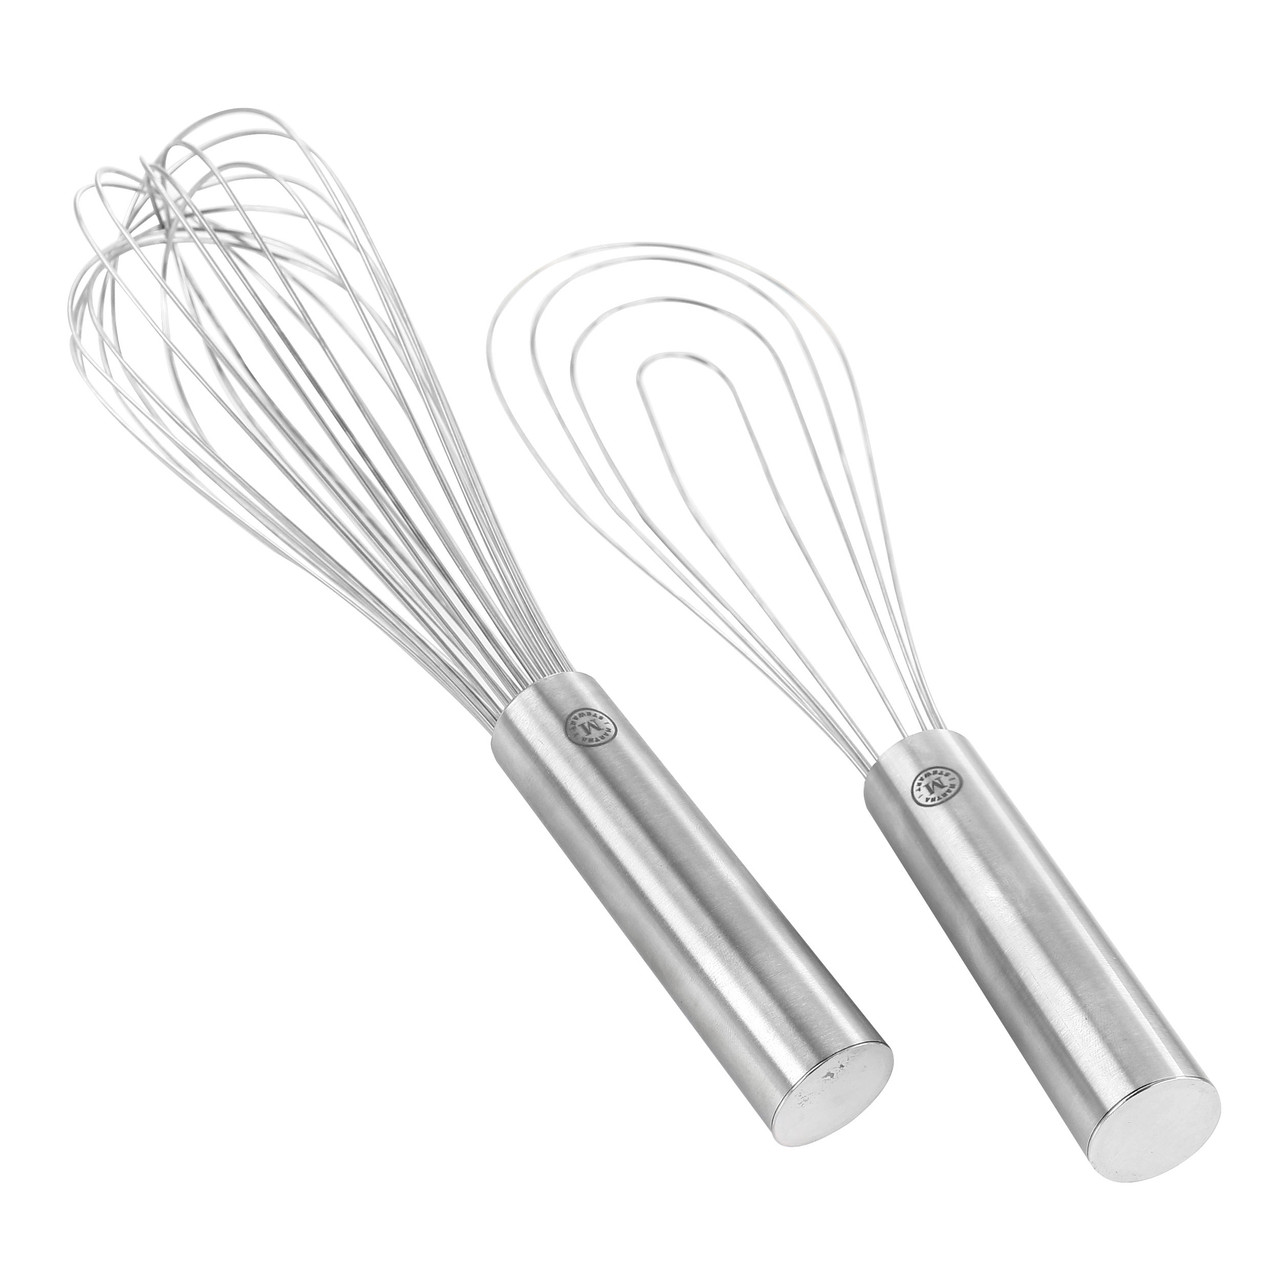 Stainless Steel 12 Flat Whisk